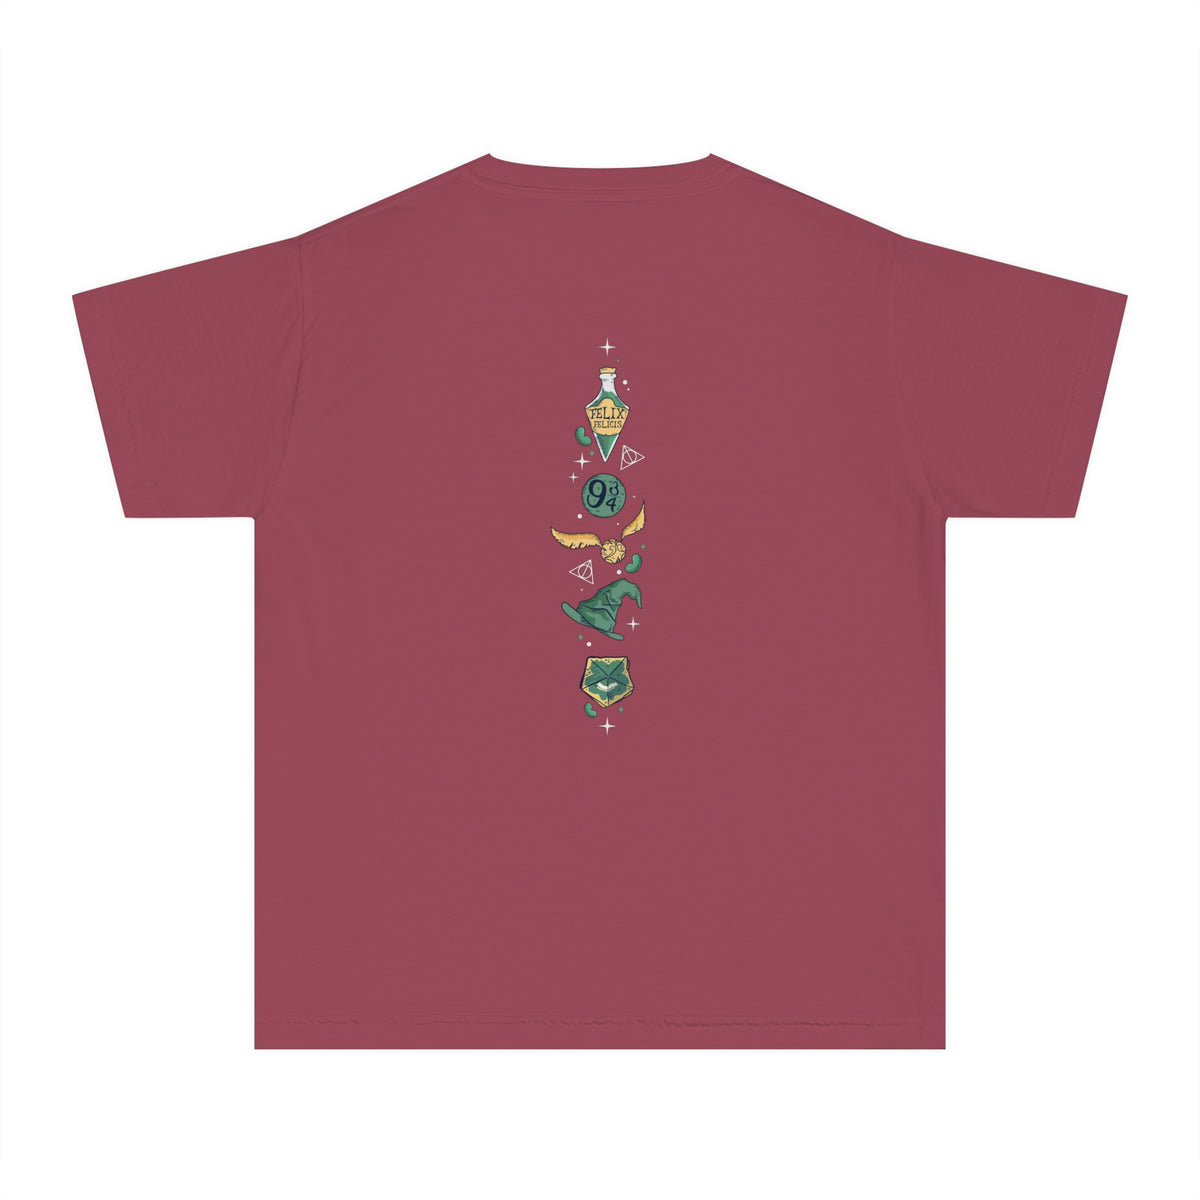 Forbidden Forest National Park Comfort Colors Youth Midweight Tee